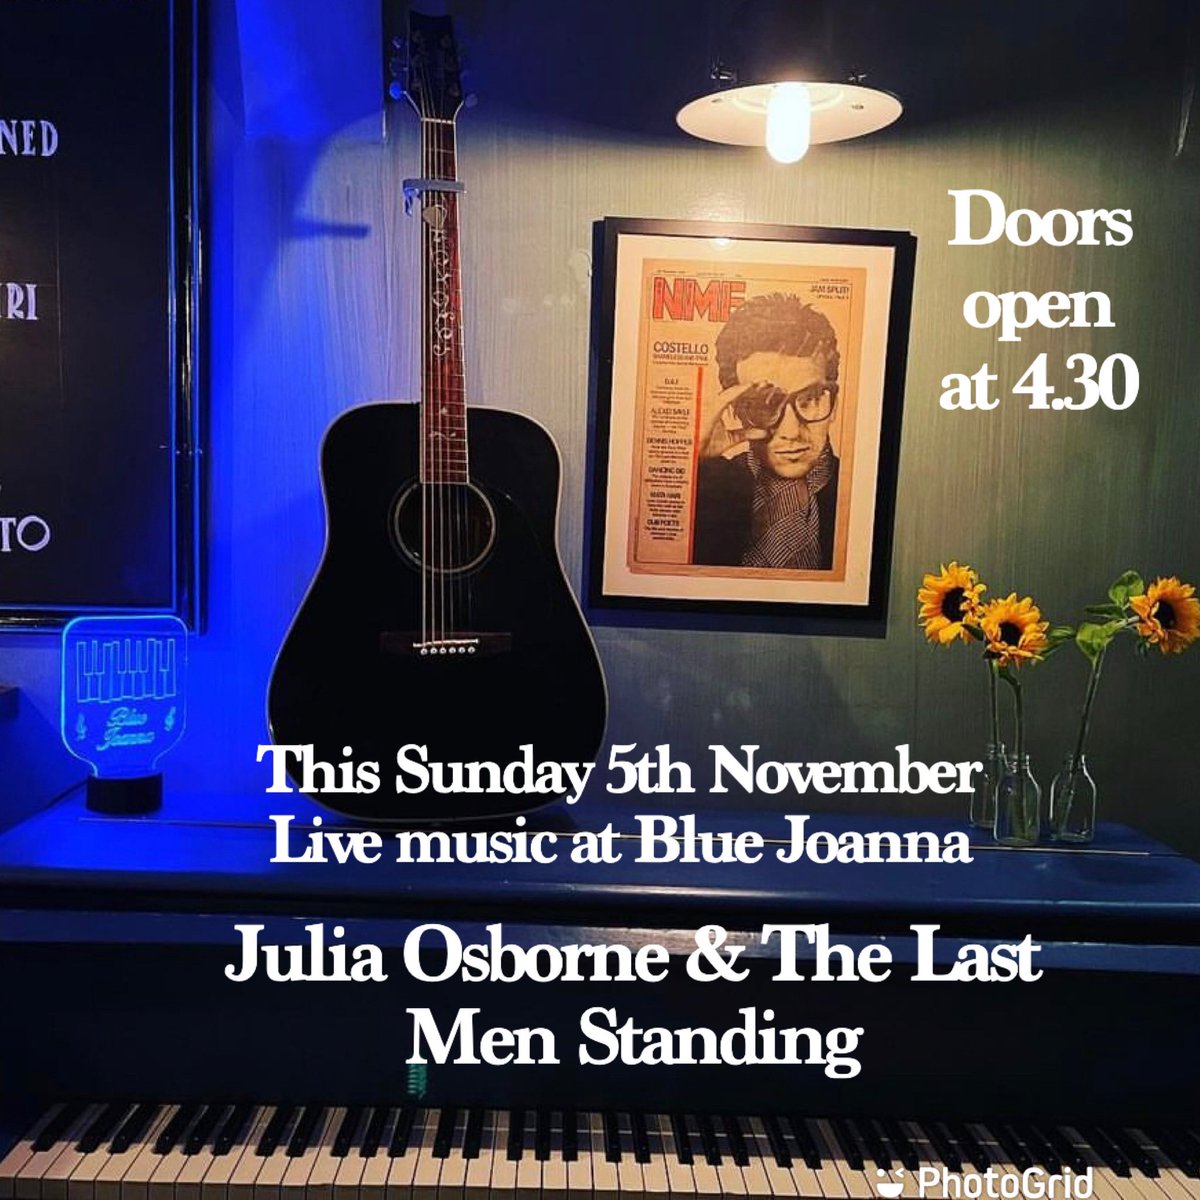 This Sunday 5th November. A Bonfire night Extravaganza! Live music with Julia Osborne & The Last Men Standing. Doors open at 4.30, Music from 5pm. Come & Join the Party! 🎶💃🏻💙🎹